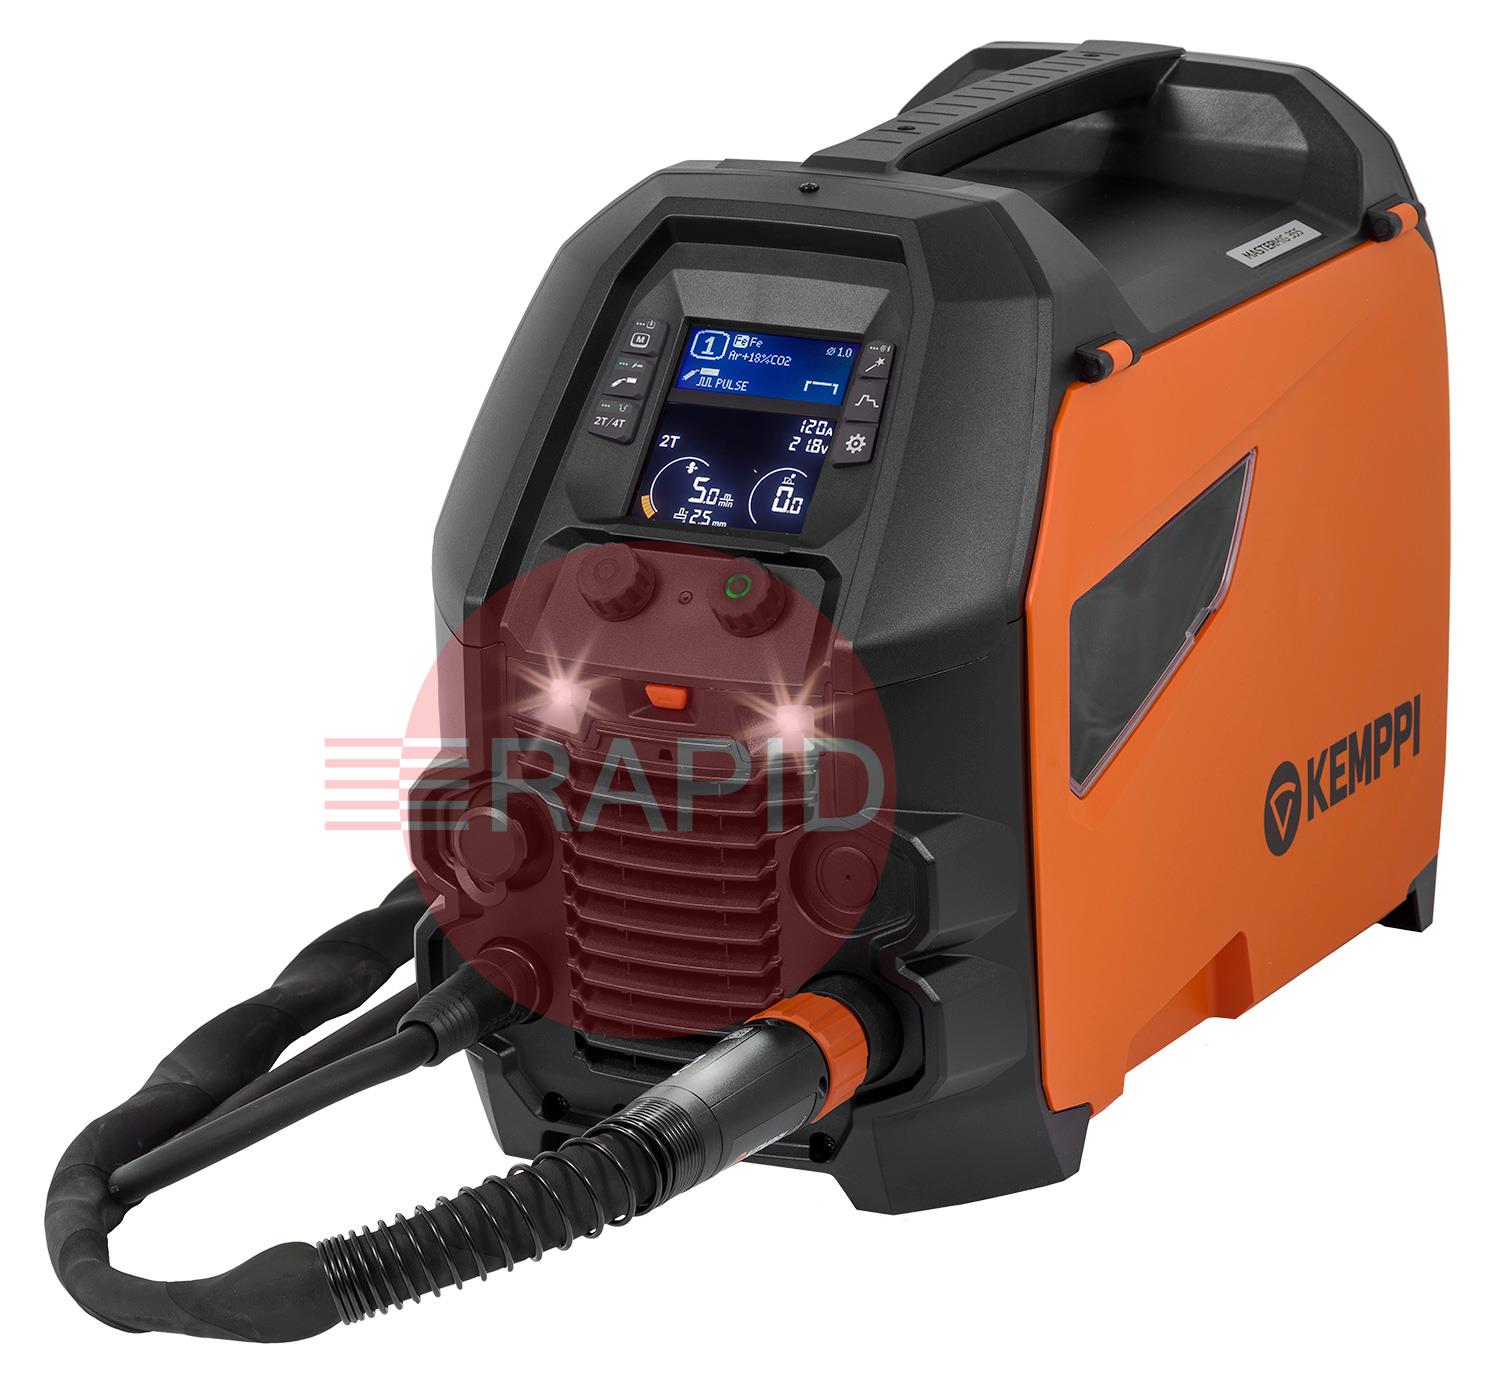 P506GX3  Kemppi Master M 355G Pulse MIG Welder Air Cooled Package, with GX 305G 5.0m Torch - 400v, 3ph